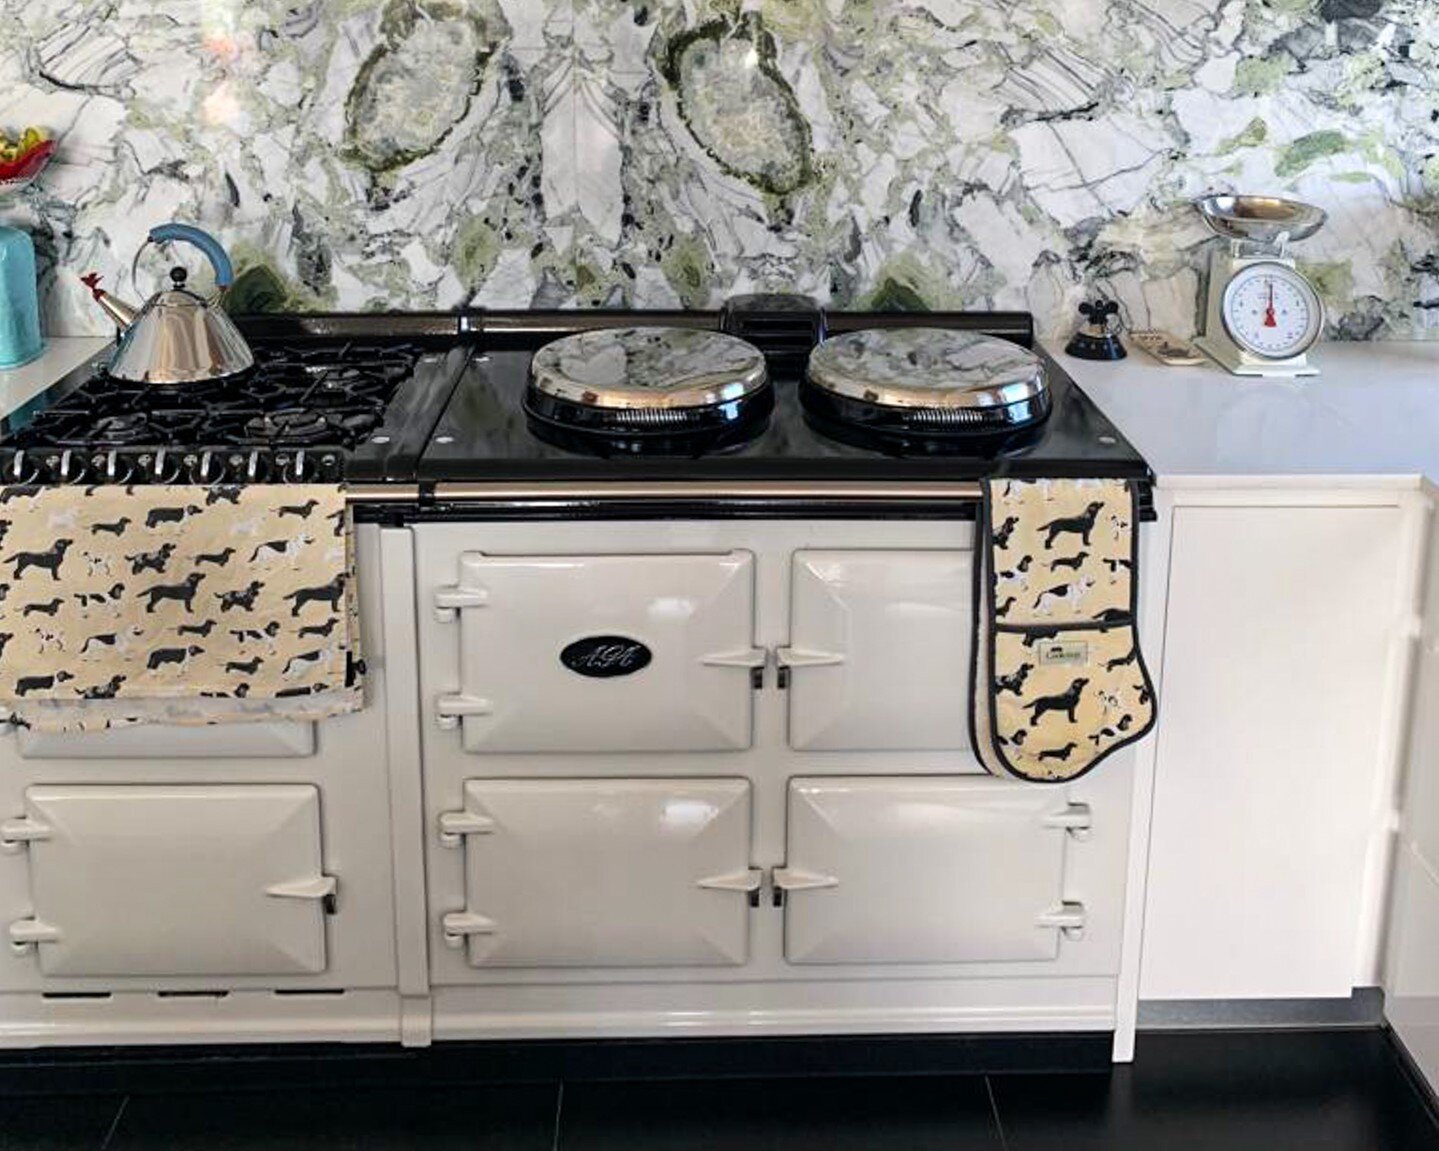 Latest AGA installation in the Cape 👏

Our client chose a gorgeous AGA 3 Oven Electric Cooker with an Integrated Module LP Gas Hob in White for their home.

Let the memories begin!

www.agarayburn.co.za
_

#aga #agasouthafrica #kitchengoals #dreamki